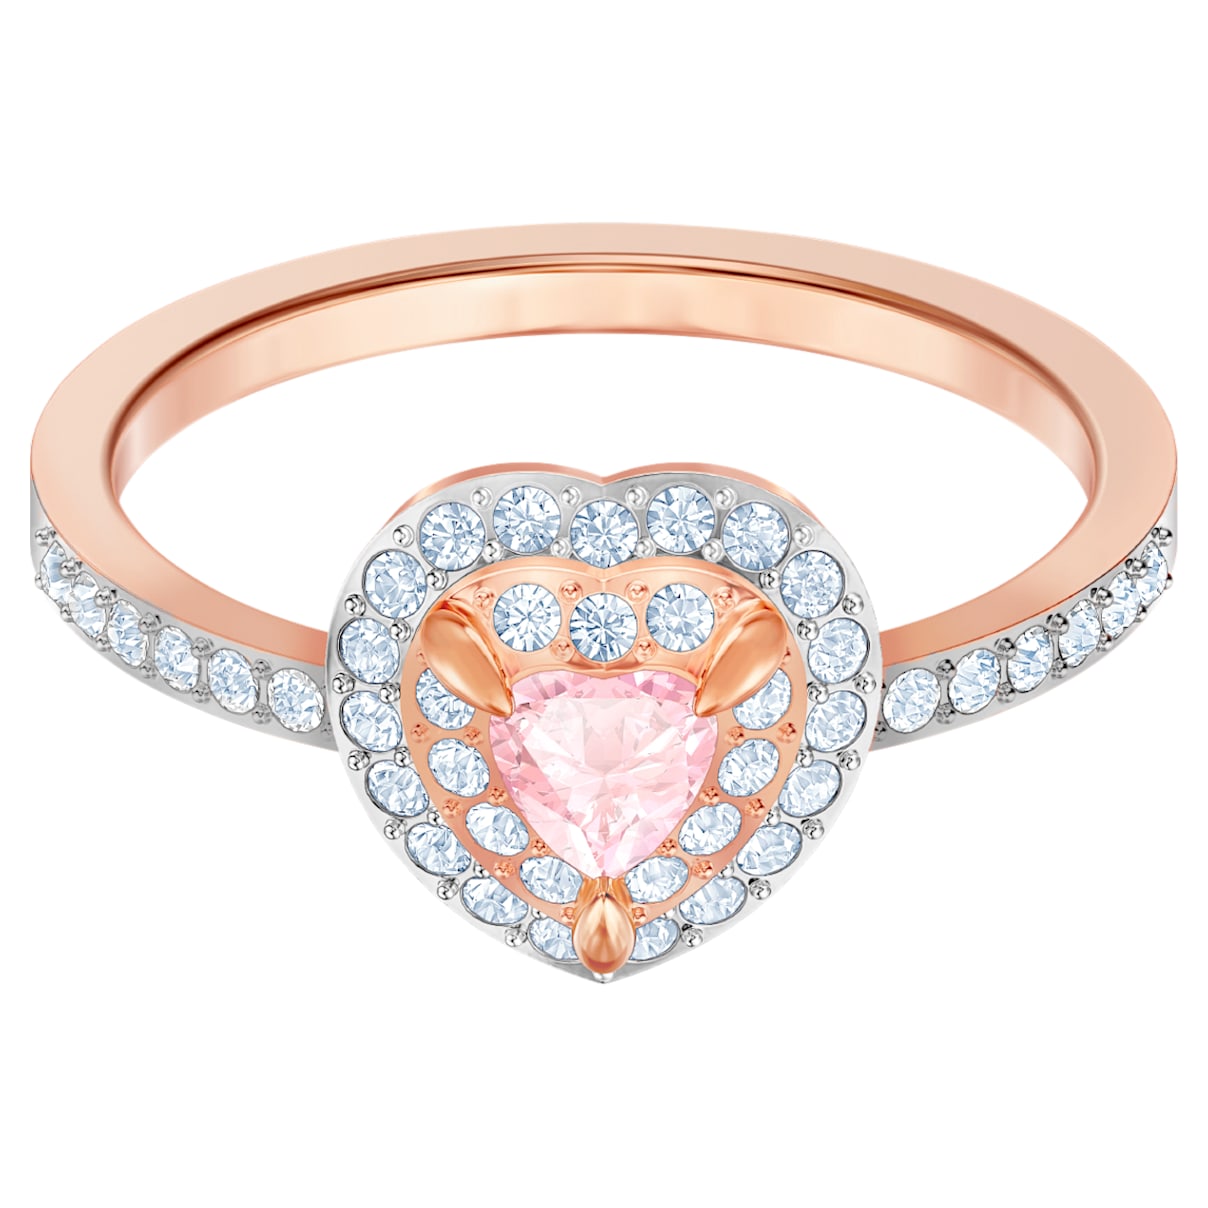 One Ring, Multi-colored, Rose-gold tone plated